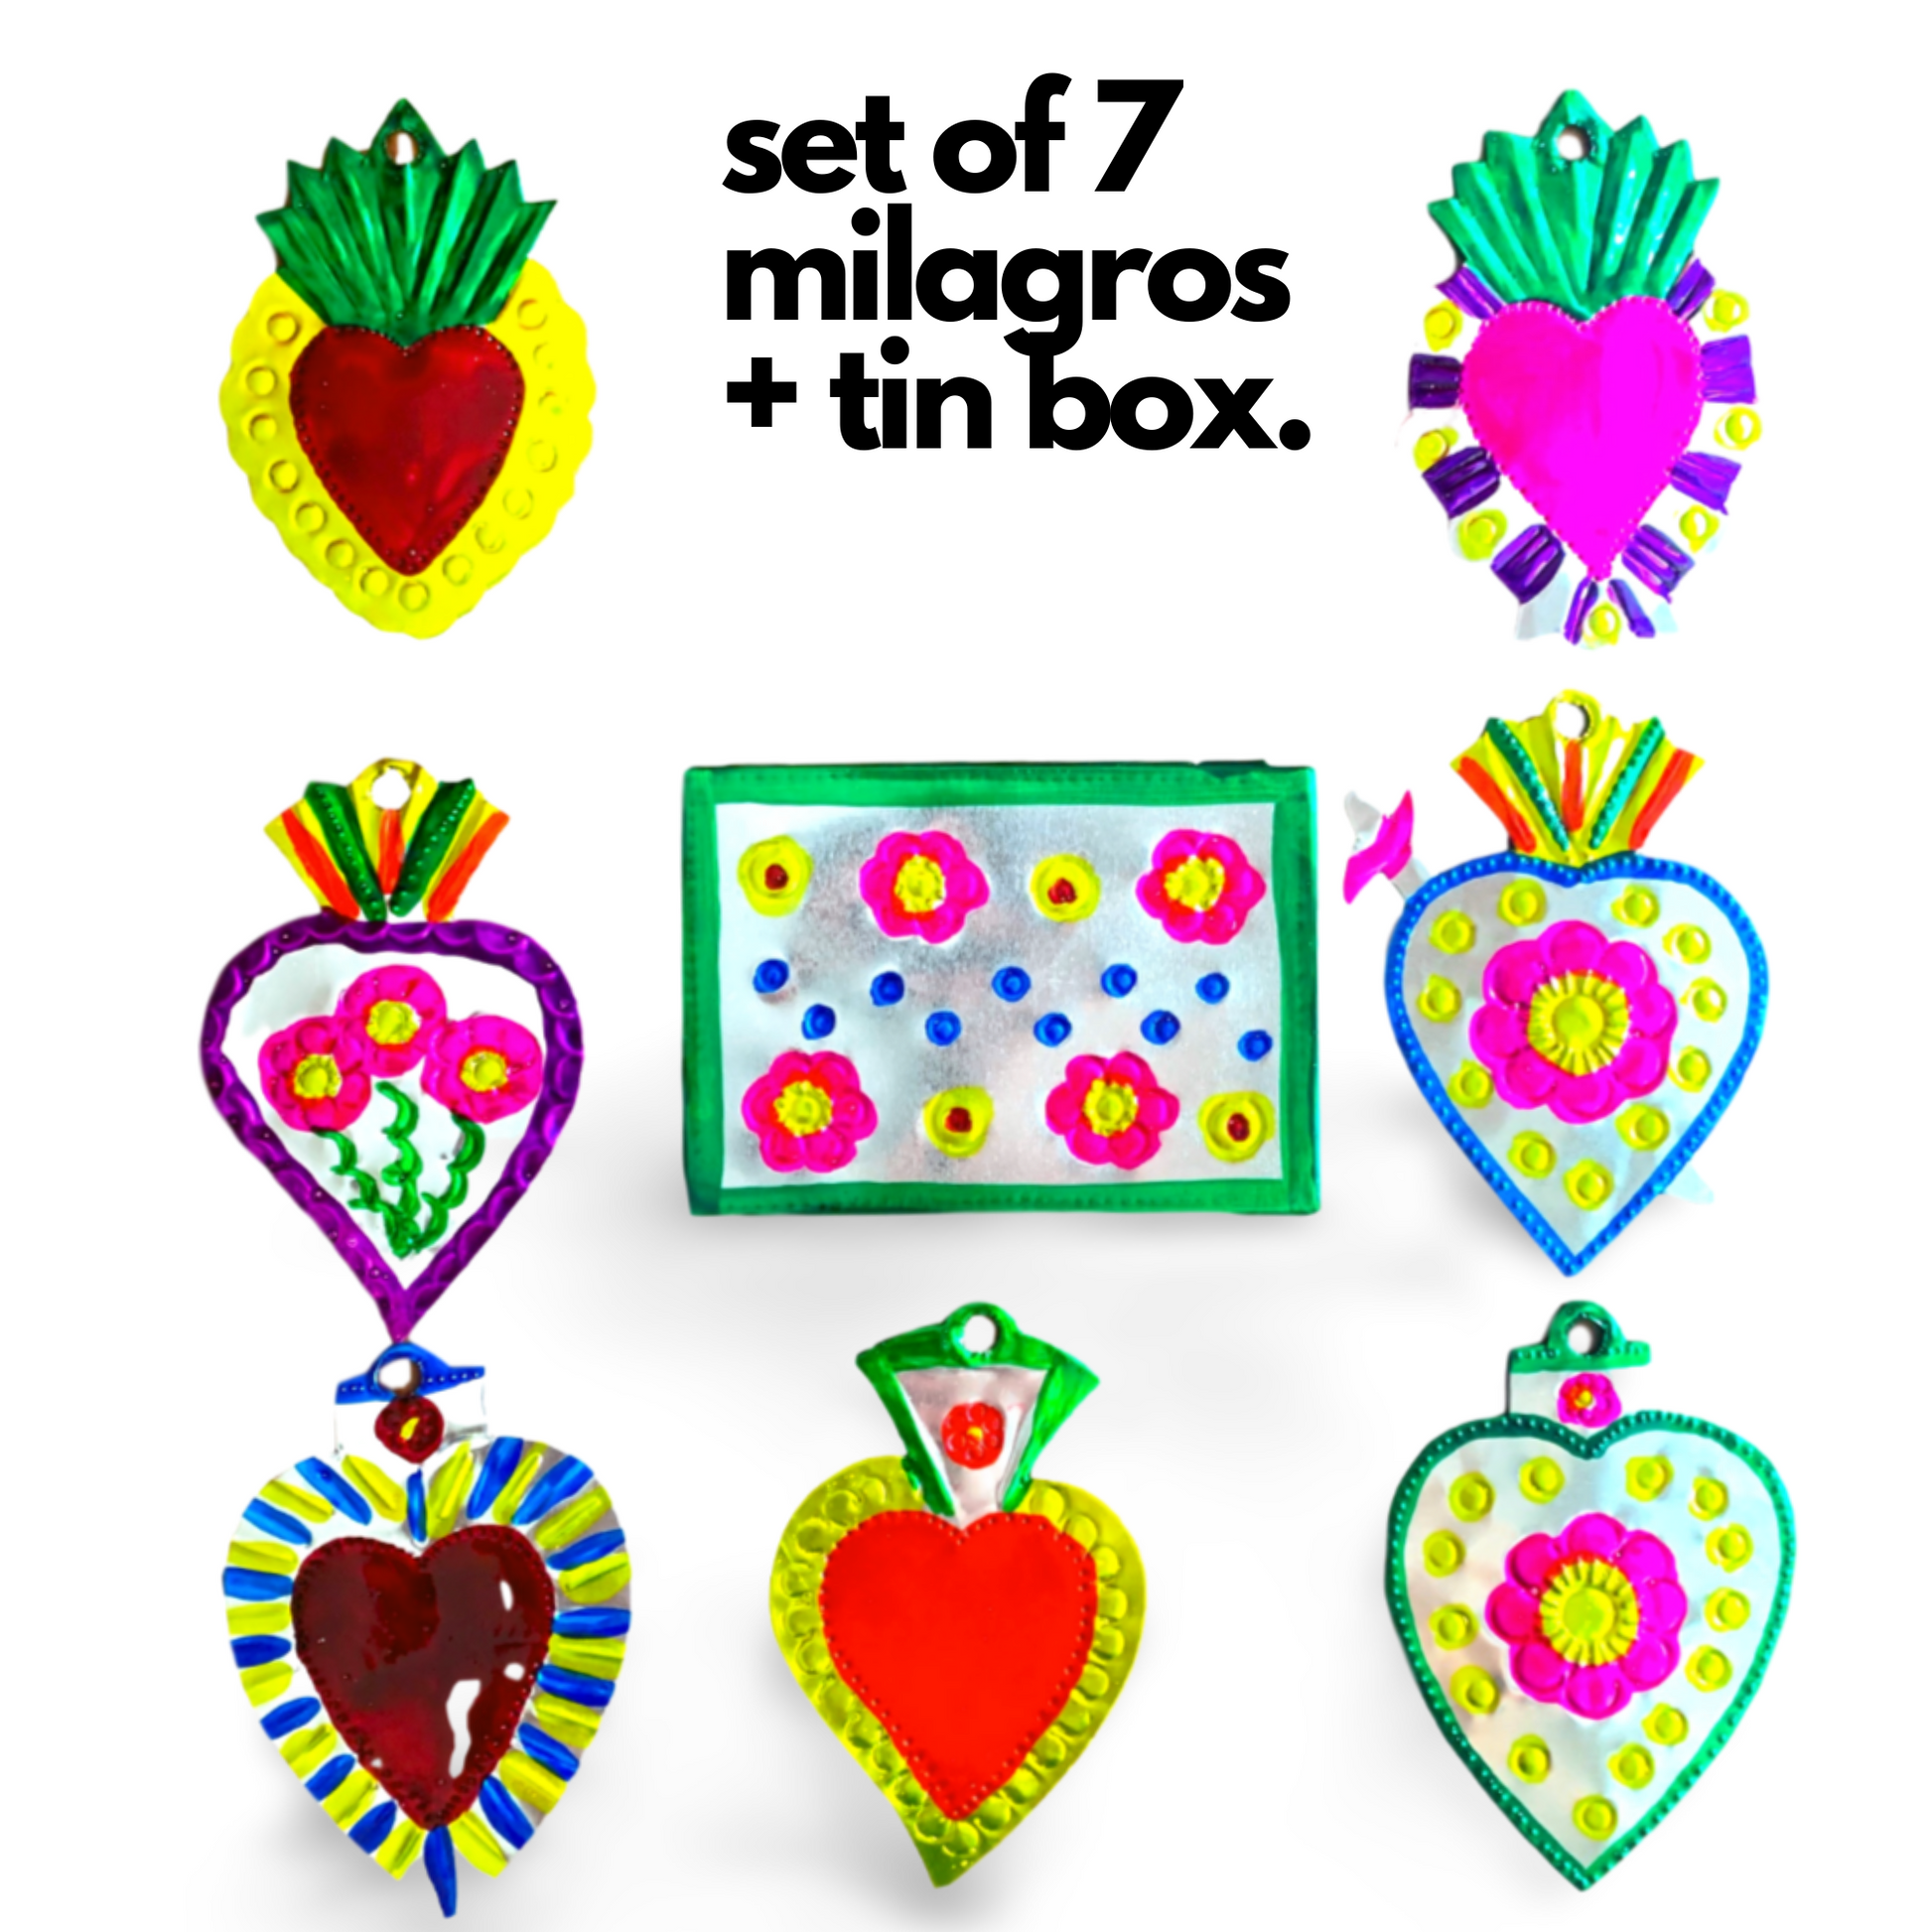 Hand-painted Mexican Milagros charms set of 7 with a decorative tin box, ready for hanging or use as bookmarks.